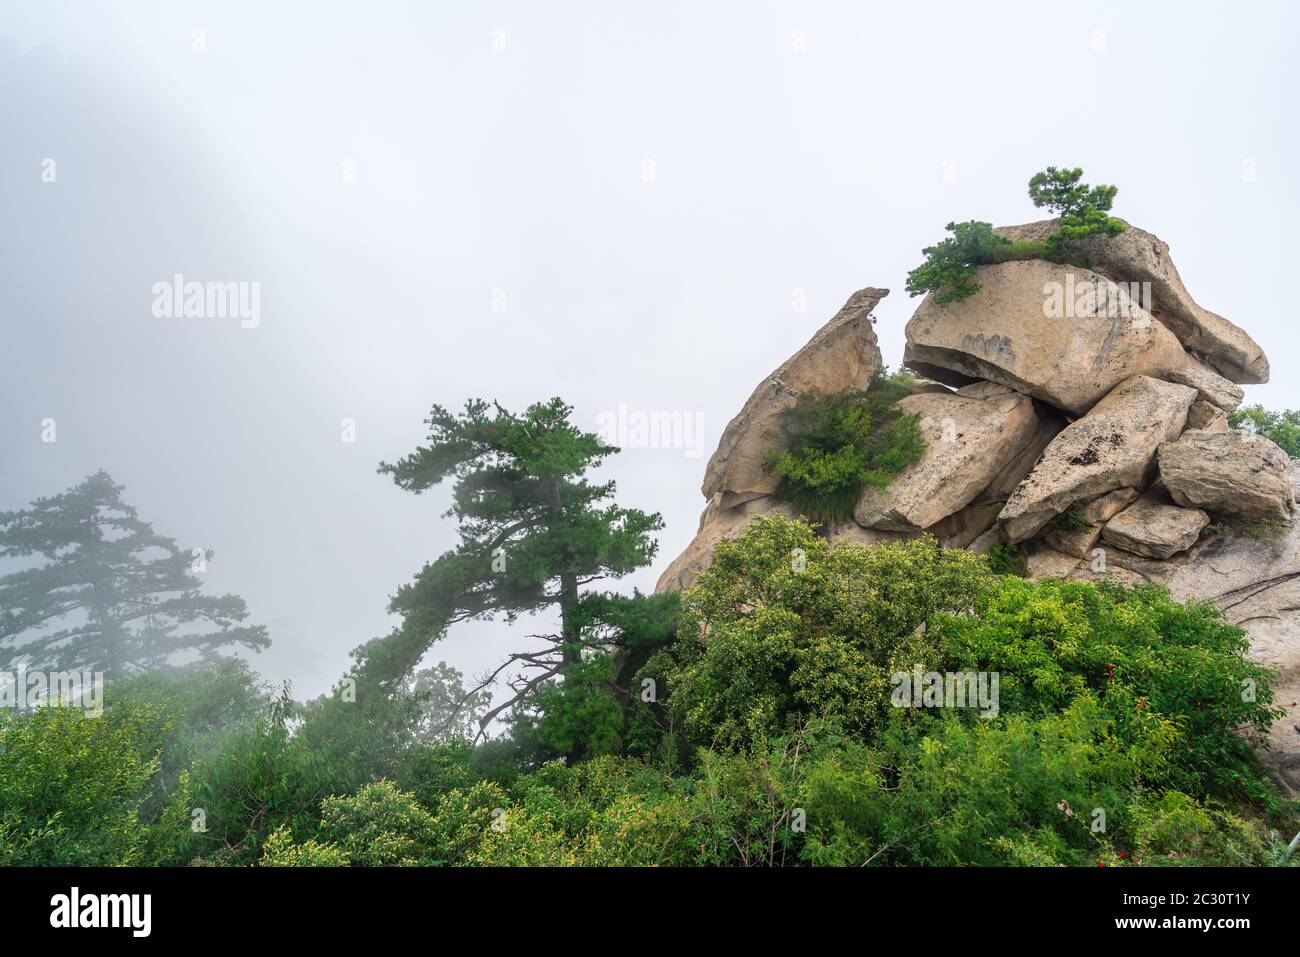 Pile of massive boulders on the summit of mountain landscape seen from the West Peak on Hua Shan mountain, Xian, Shaanxi Province, China Stock Photo